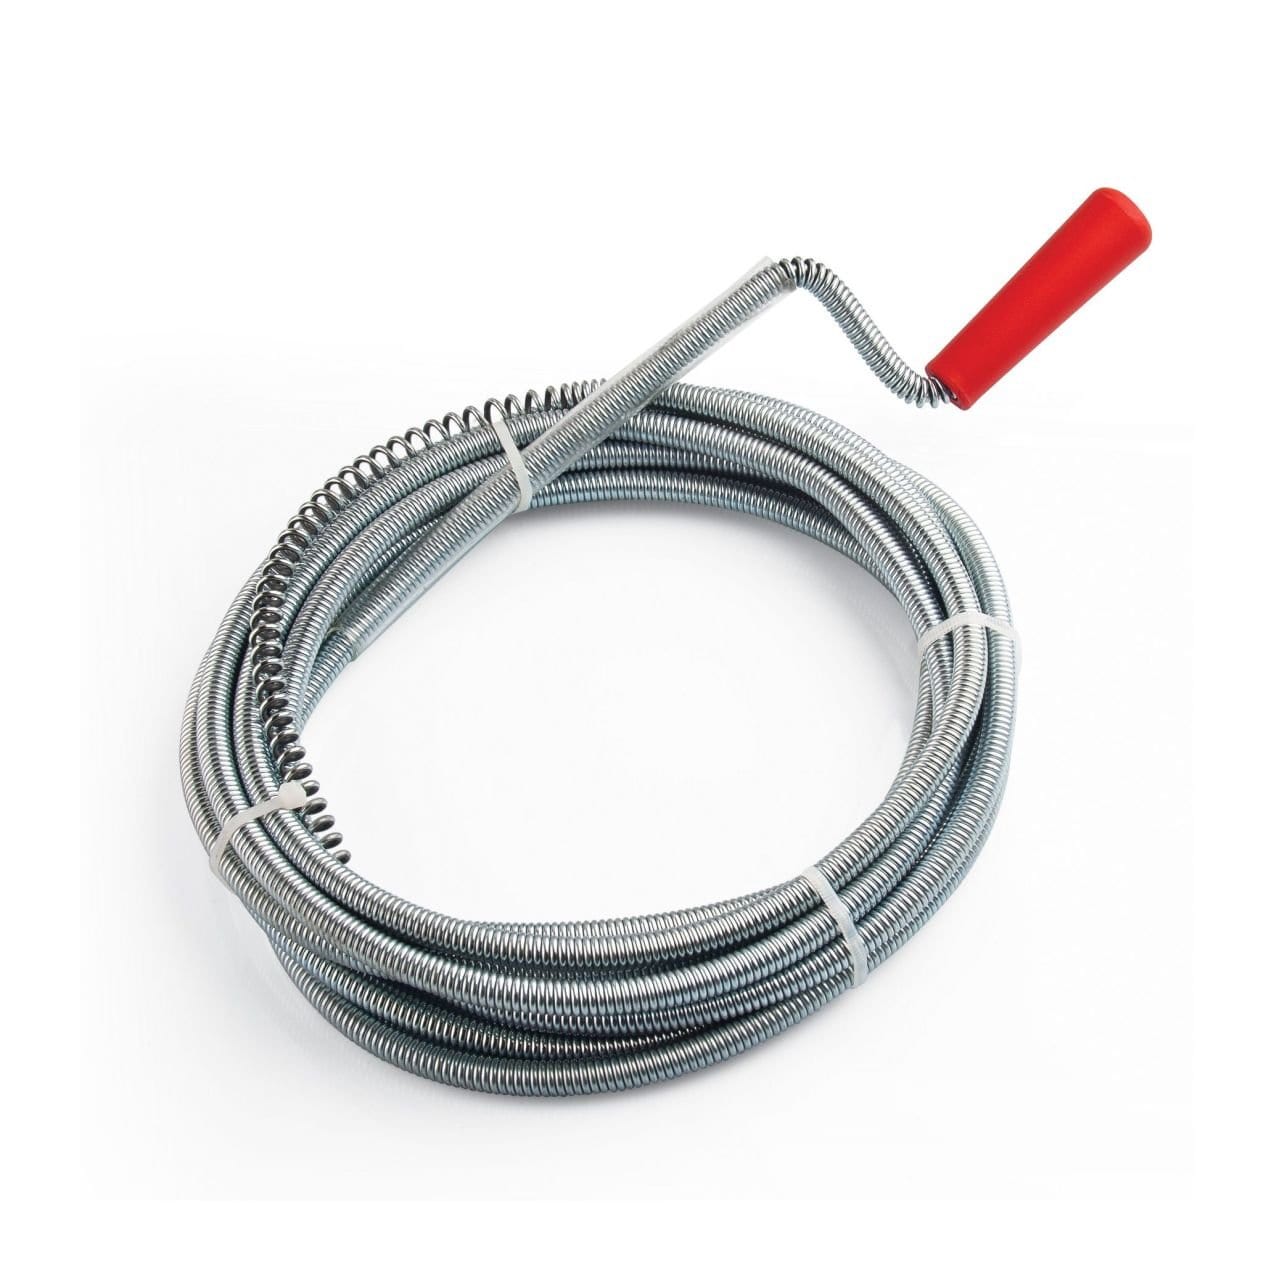 SGS Drain Cleaning Spring with Plastic Grip - SGS973 | Supply Master | Accra, Ghana Cleaning Equipment Accessories Buy Tools hardware Building materials